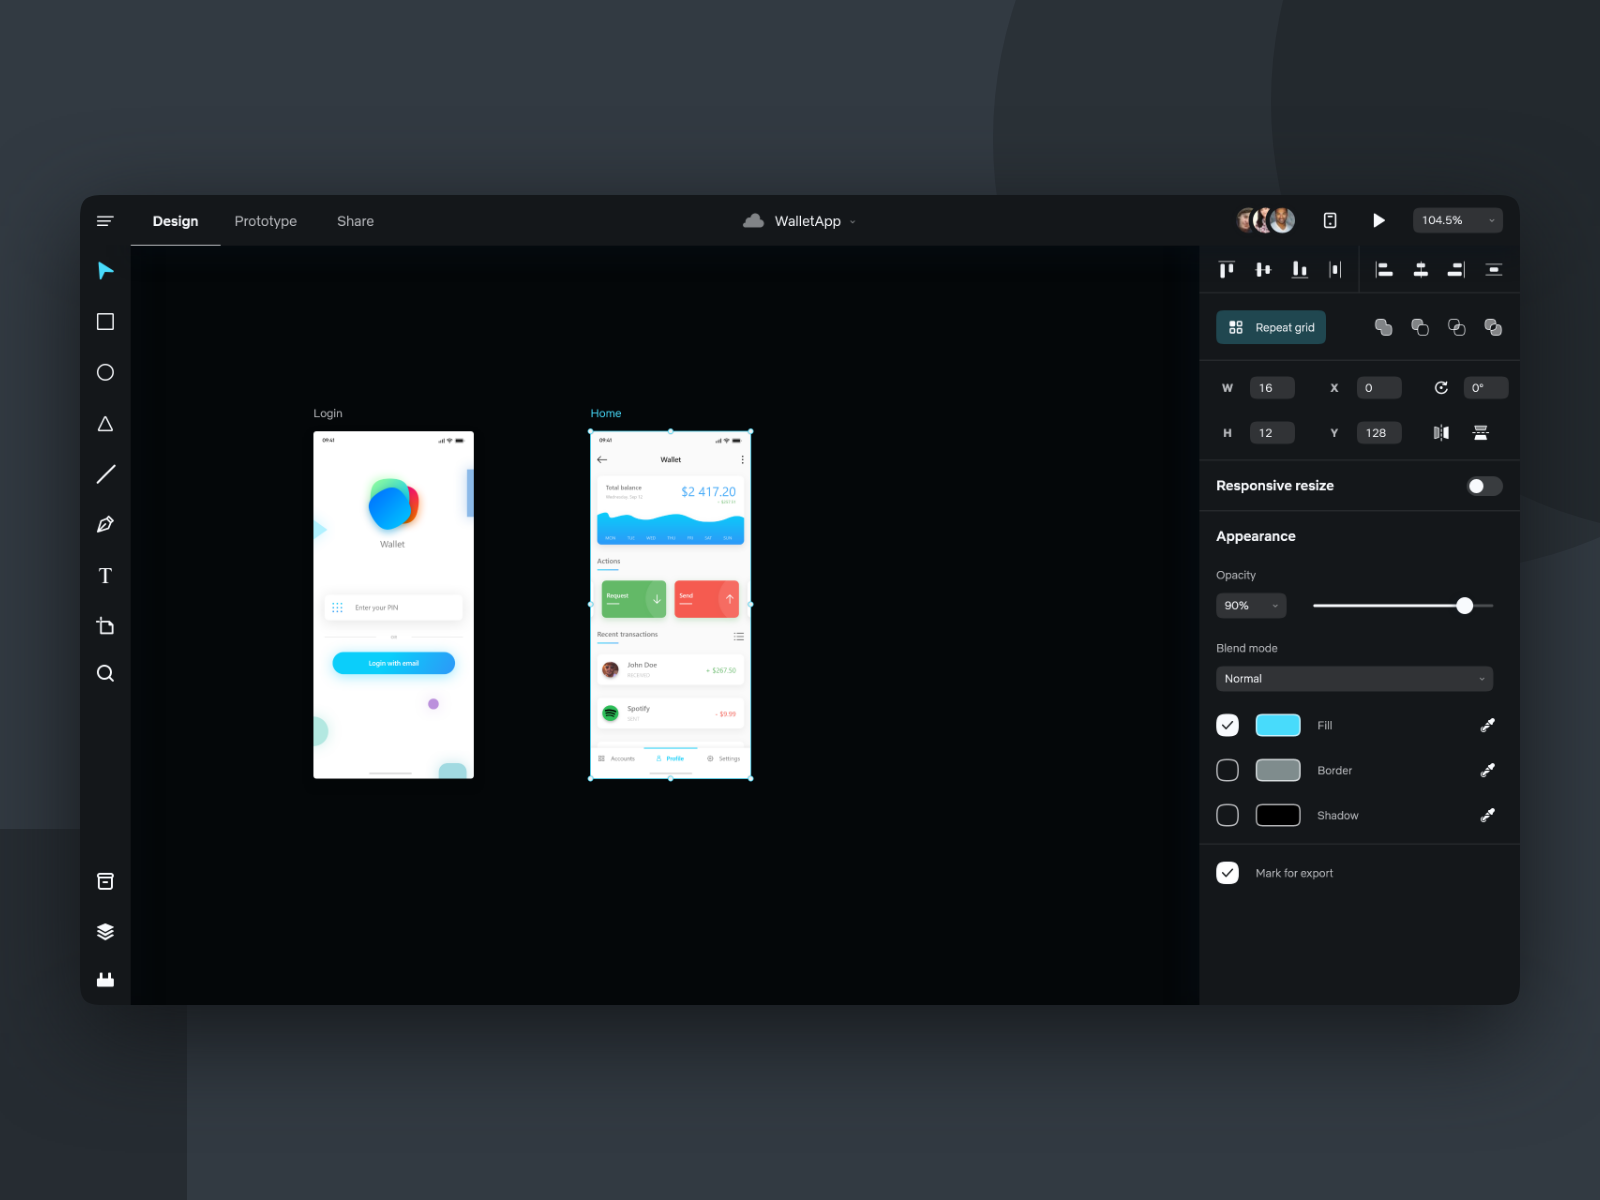 Adobe XD Dark by Amar Cahtarevic on Dribbble